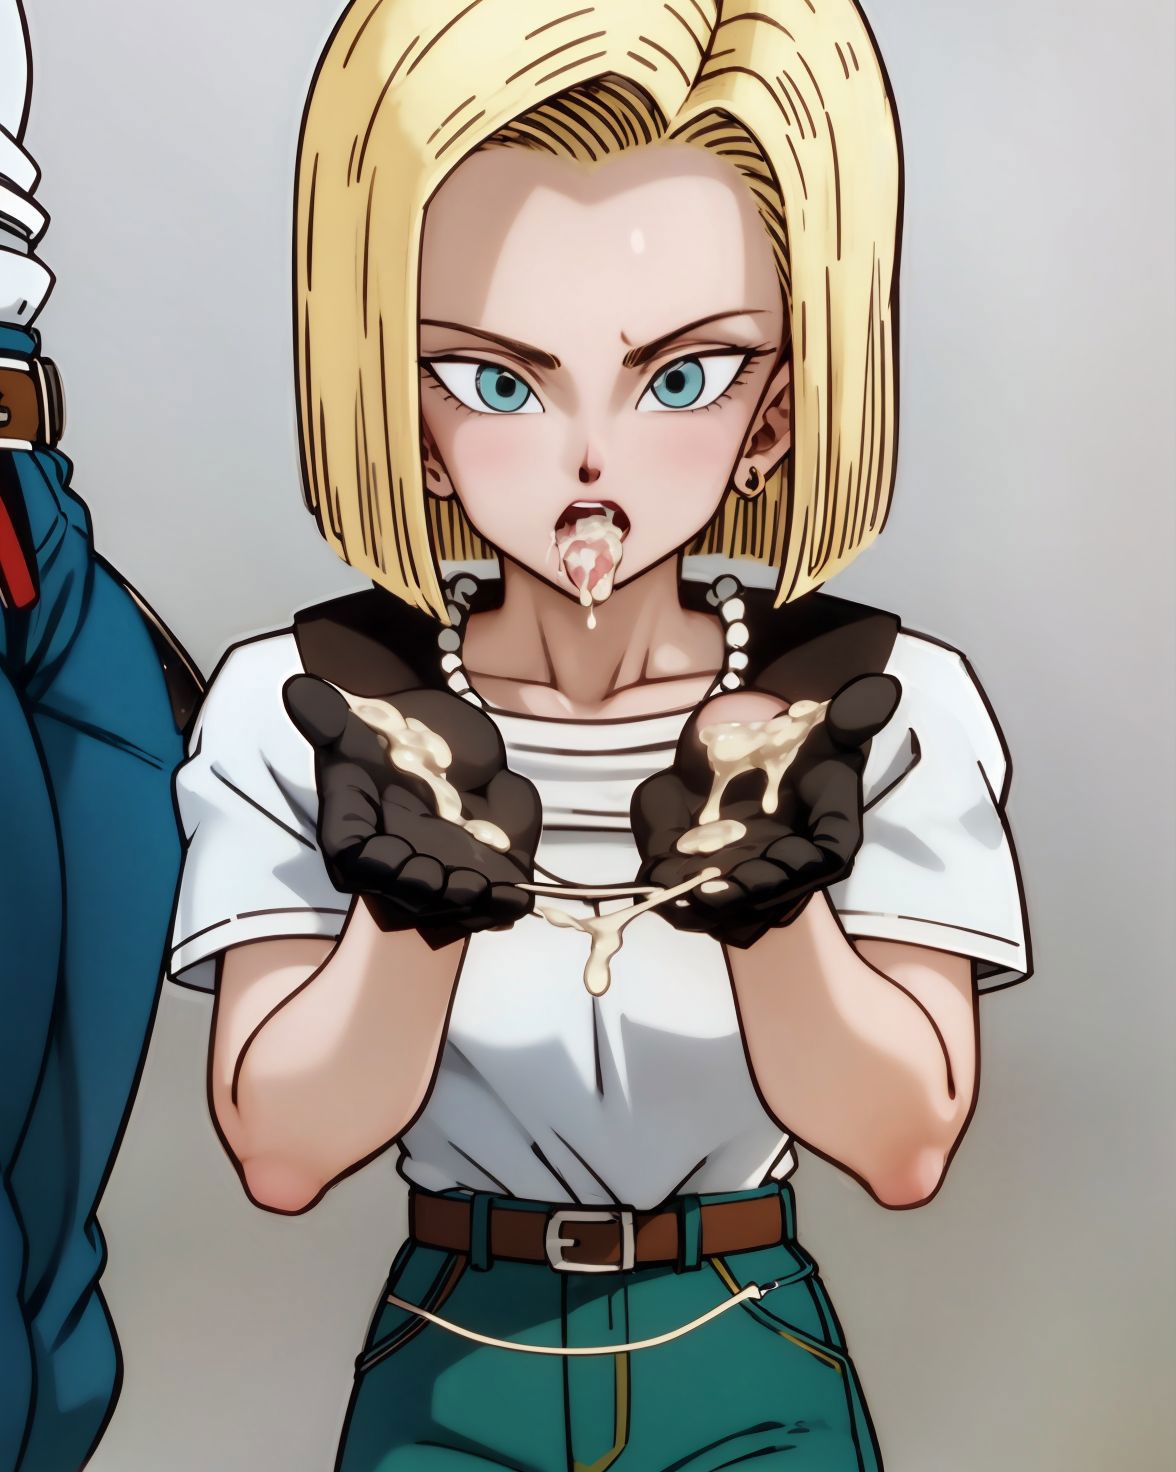 Android 18 - DBZ image by bla